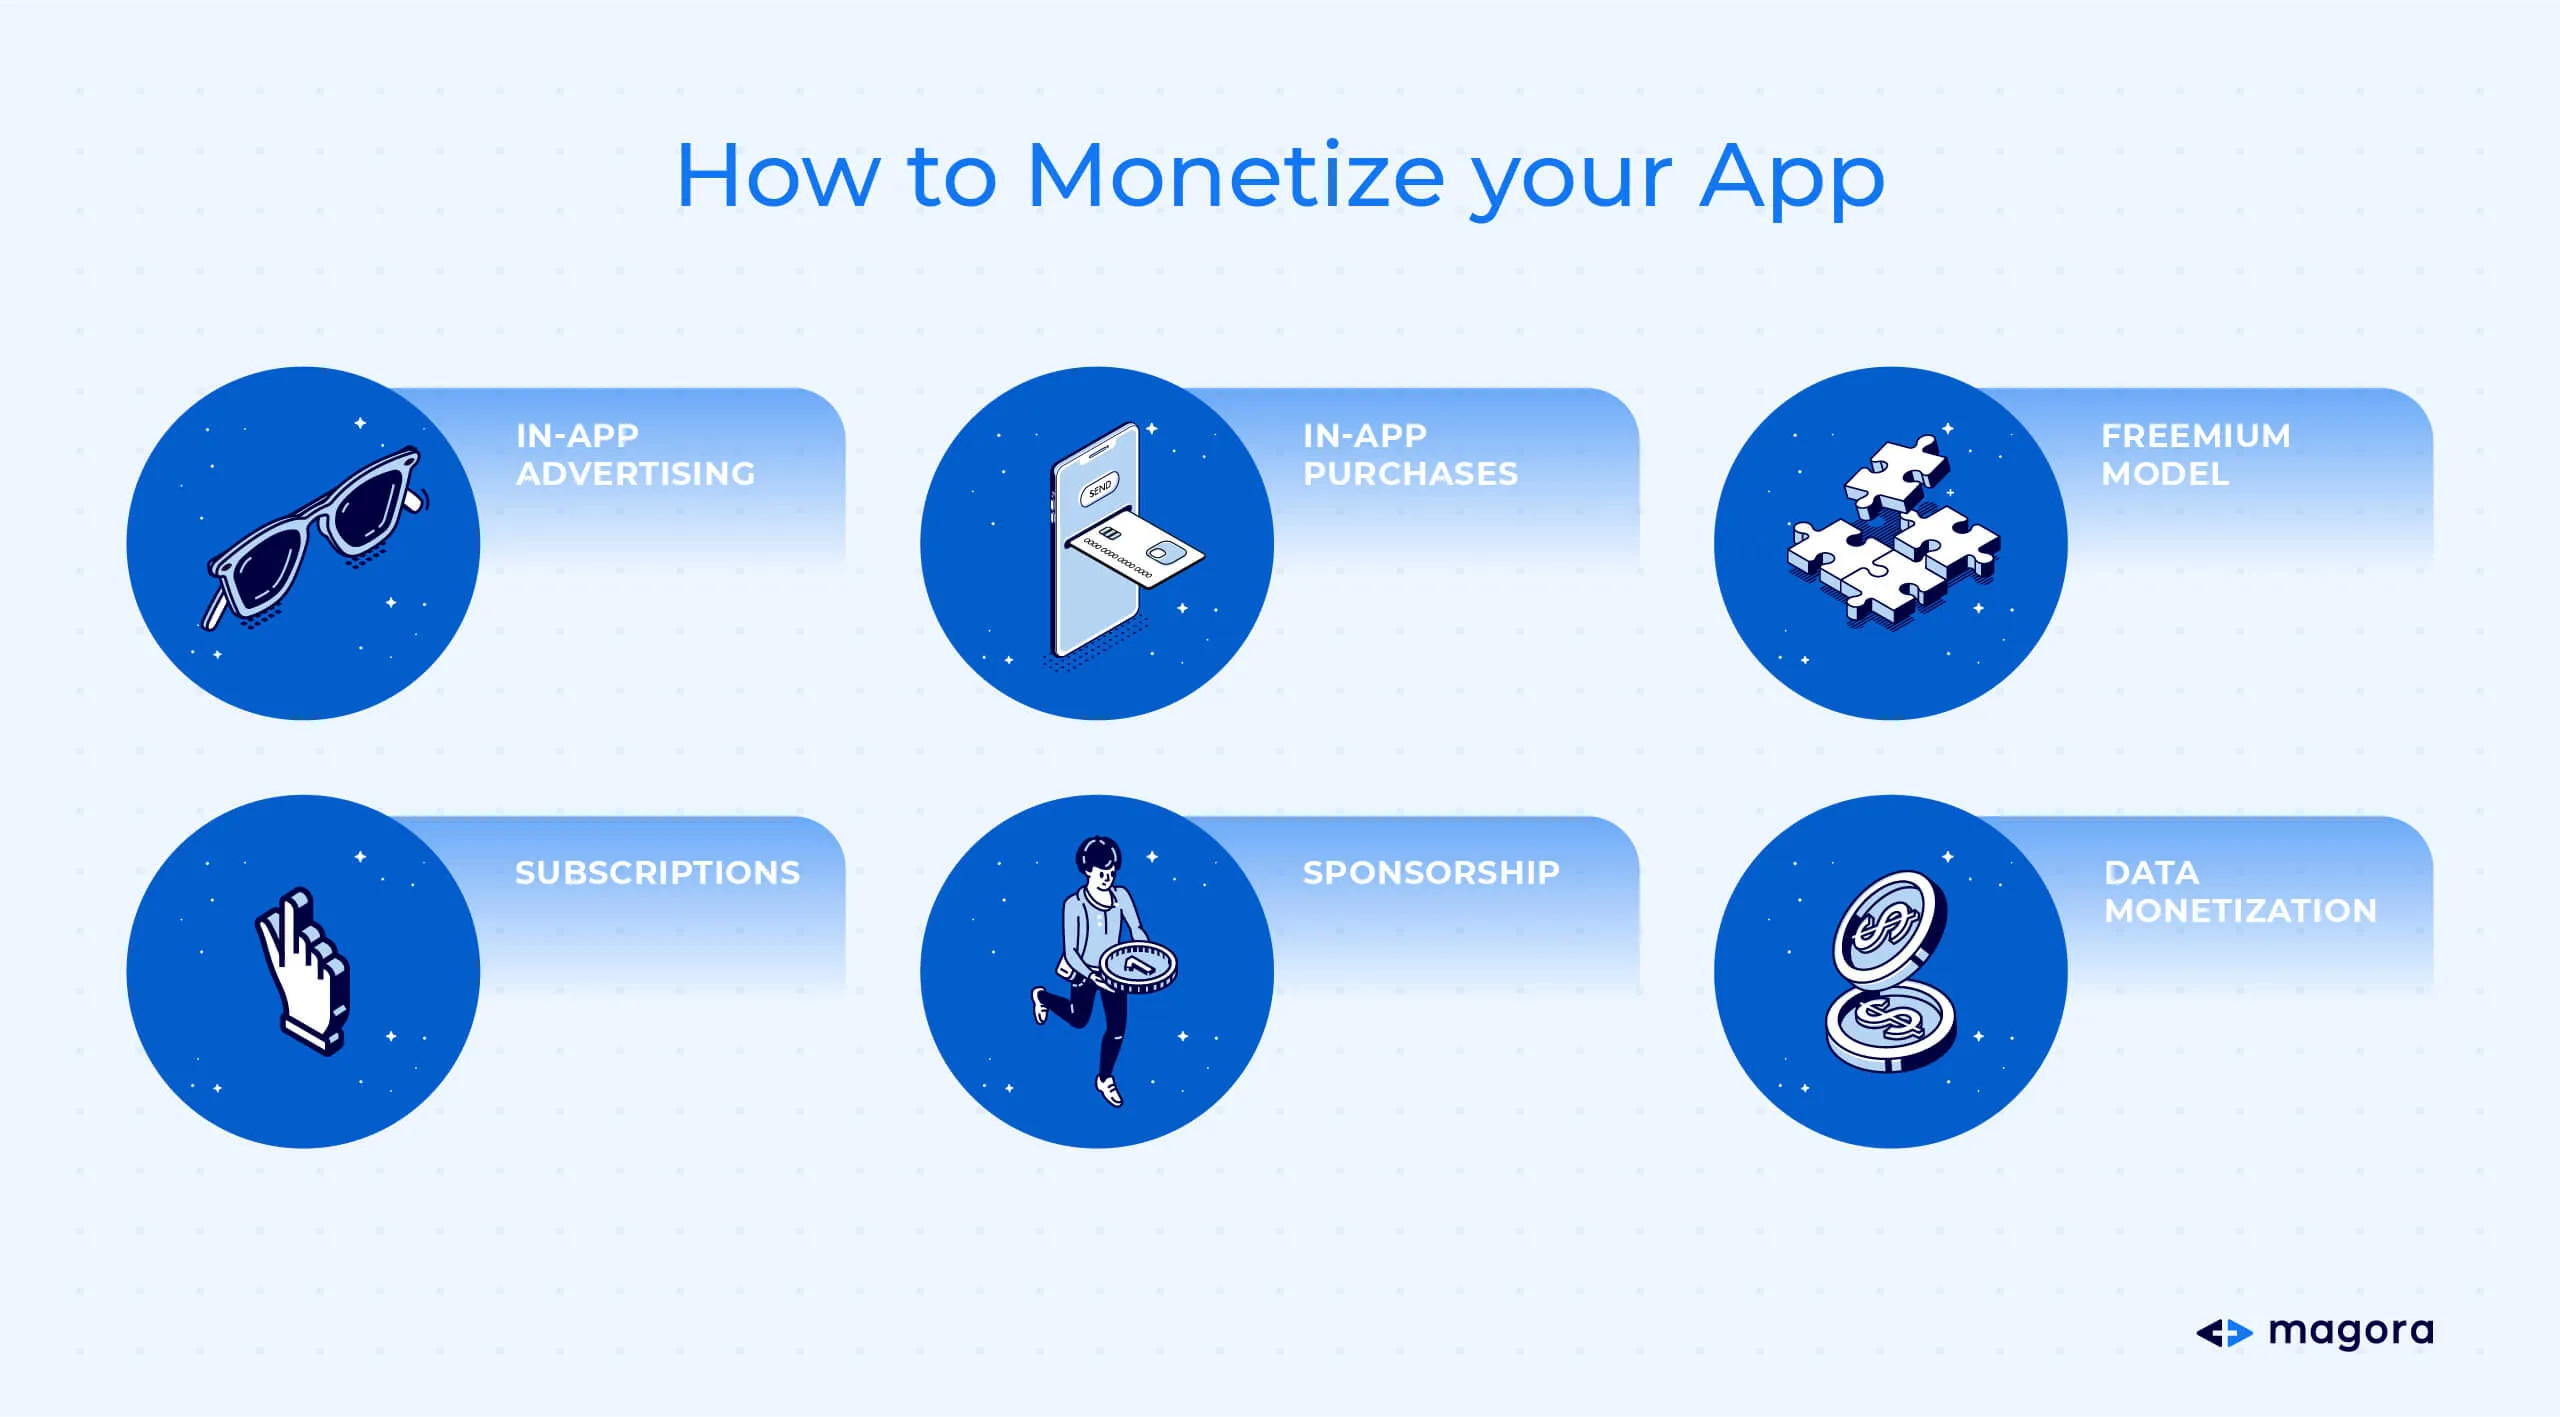 How to monetize your App